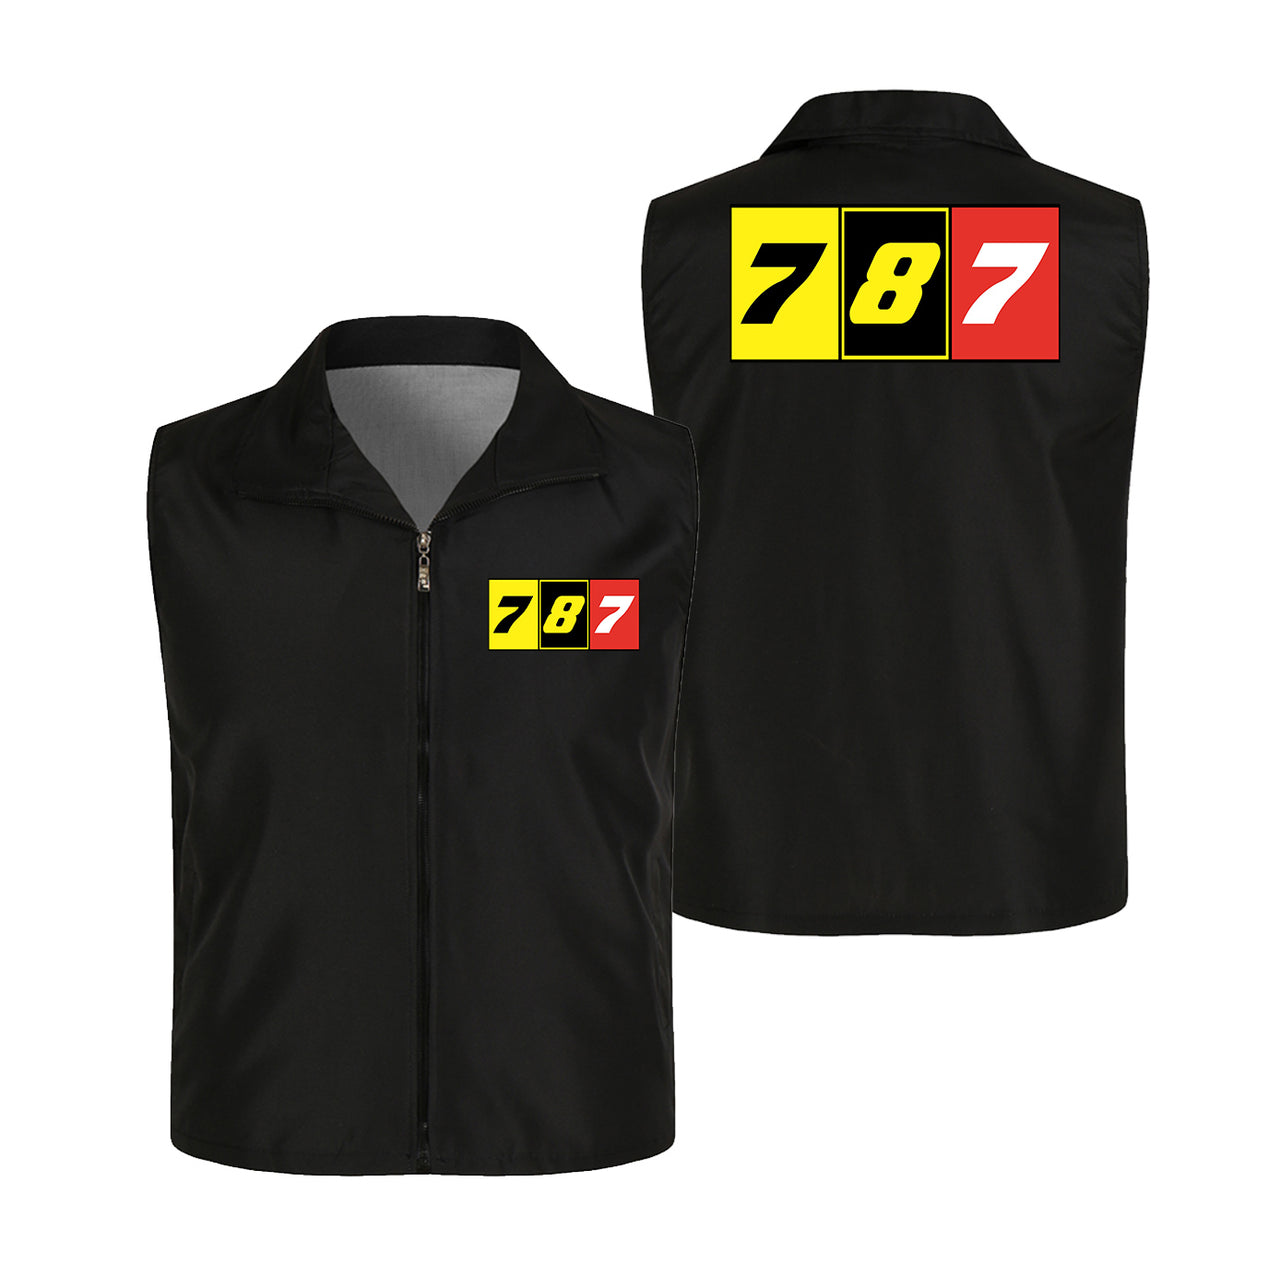 Flat Colourful 787 Designed Thin Style Vests